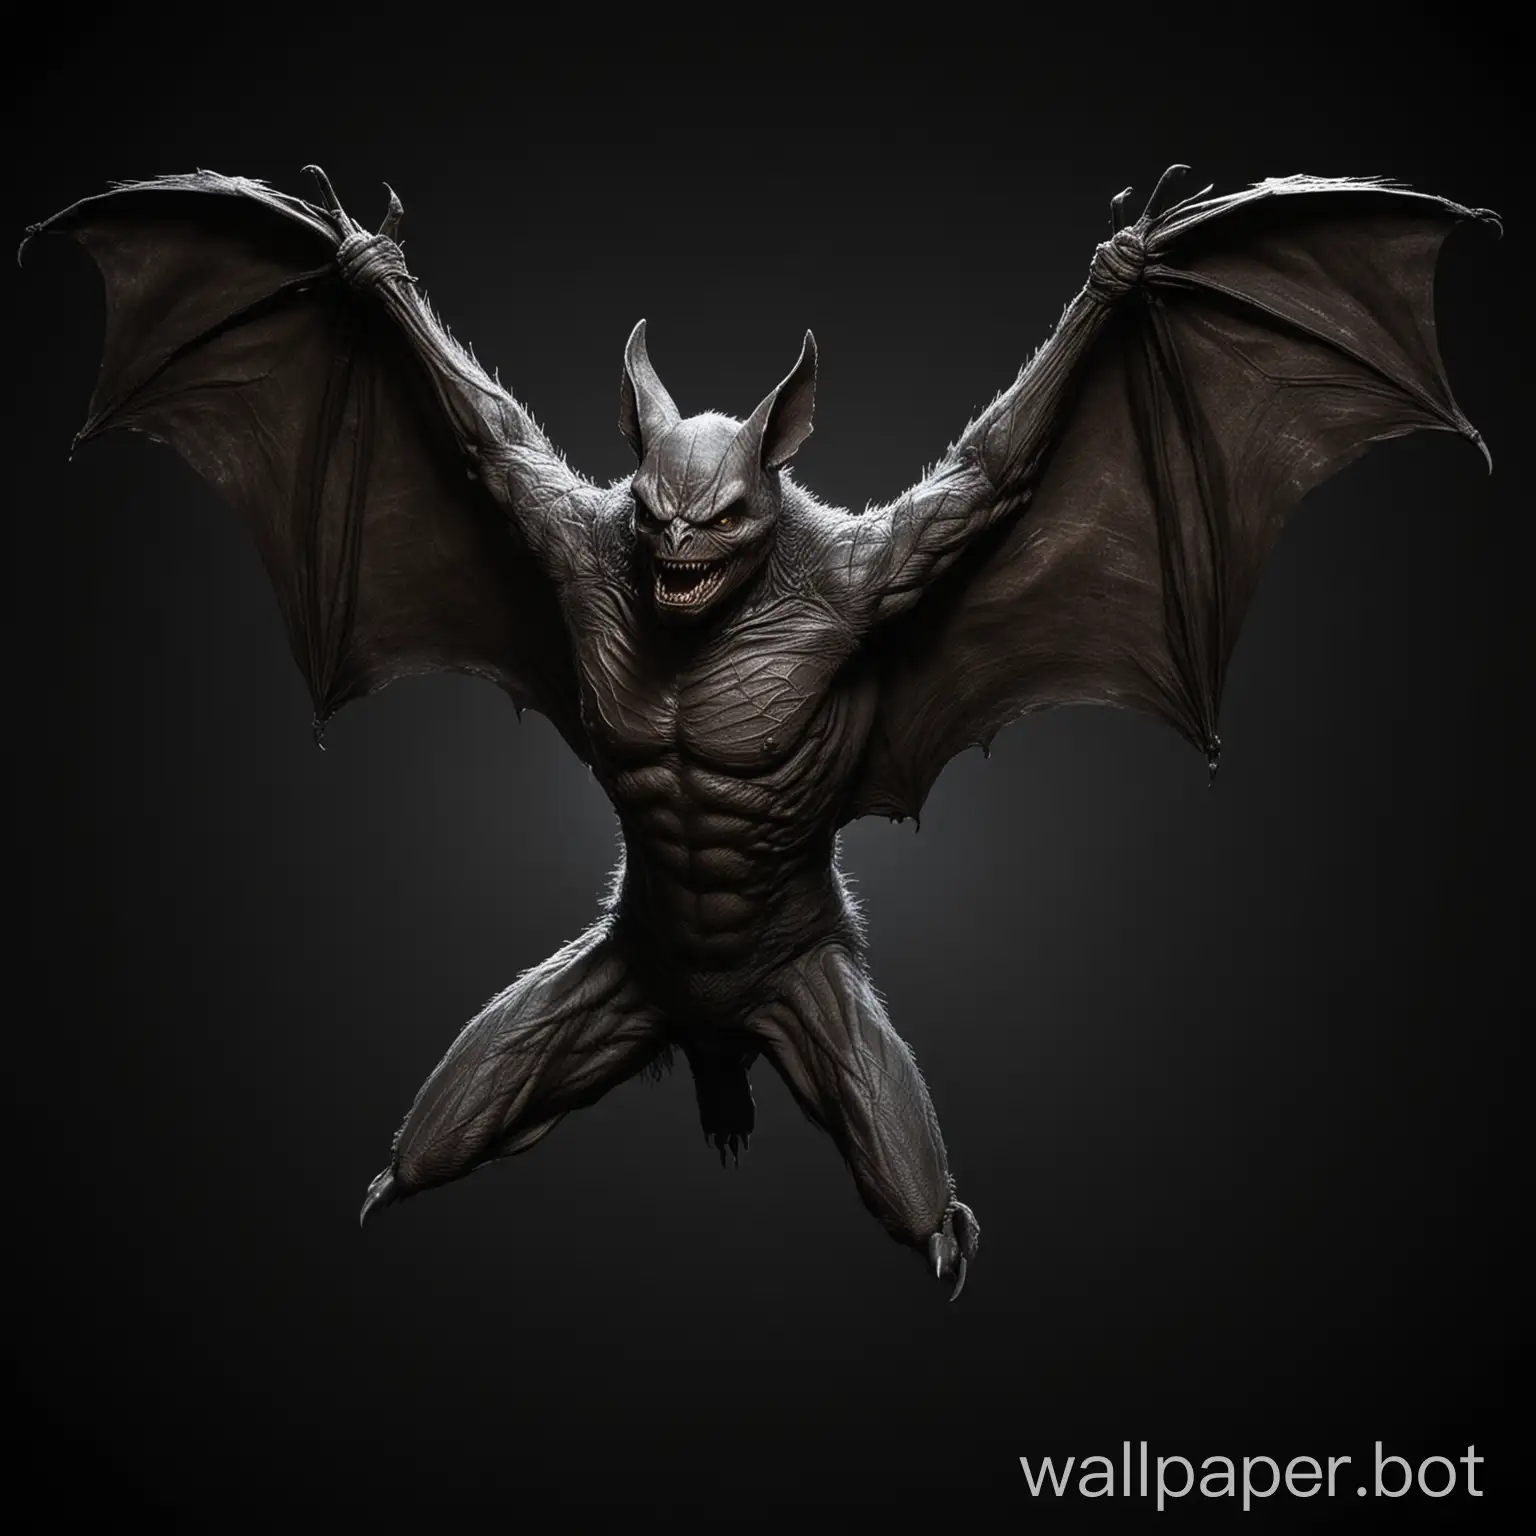 Draw a terrible, scary, big, humanoid, flying bat on a black background.